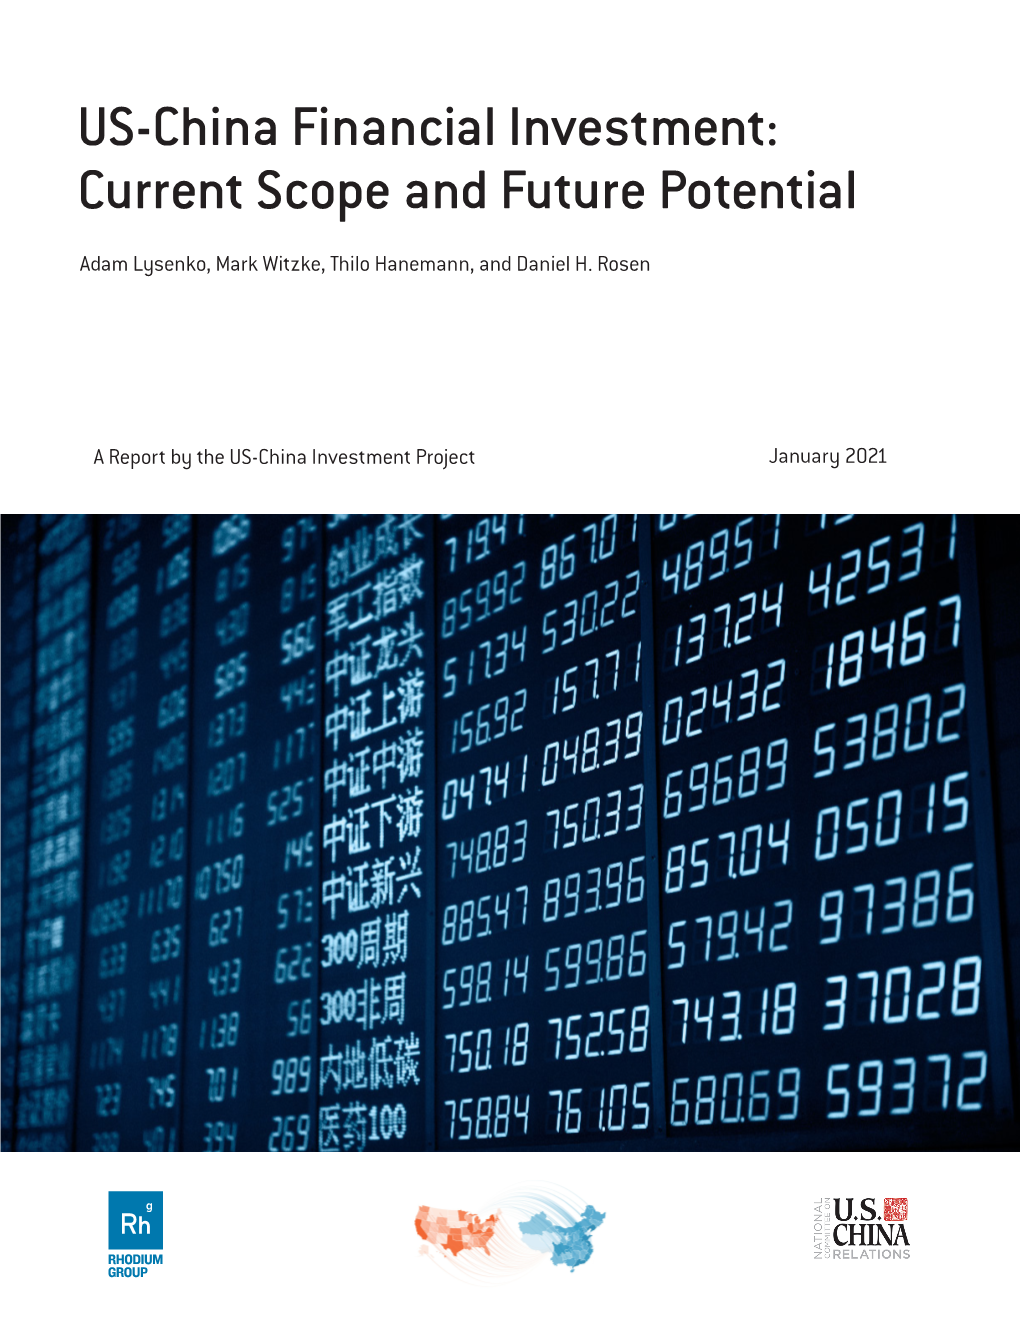 US-China Financial Investment: Current Scope and Future Potential